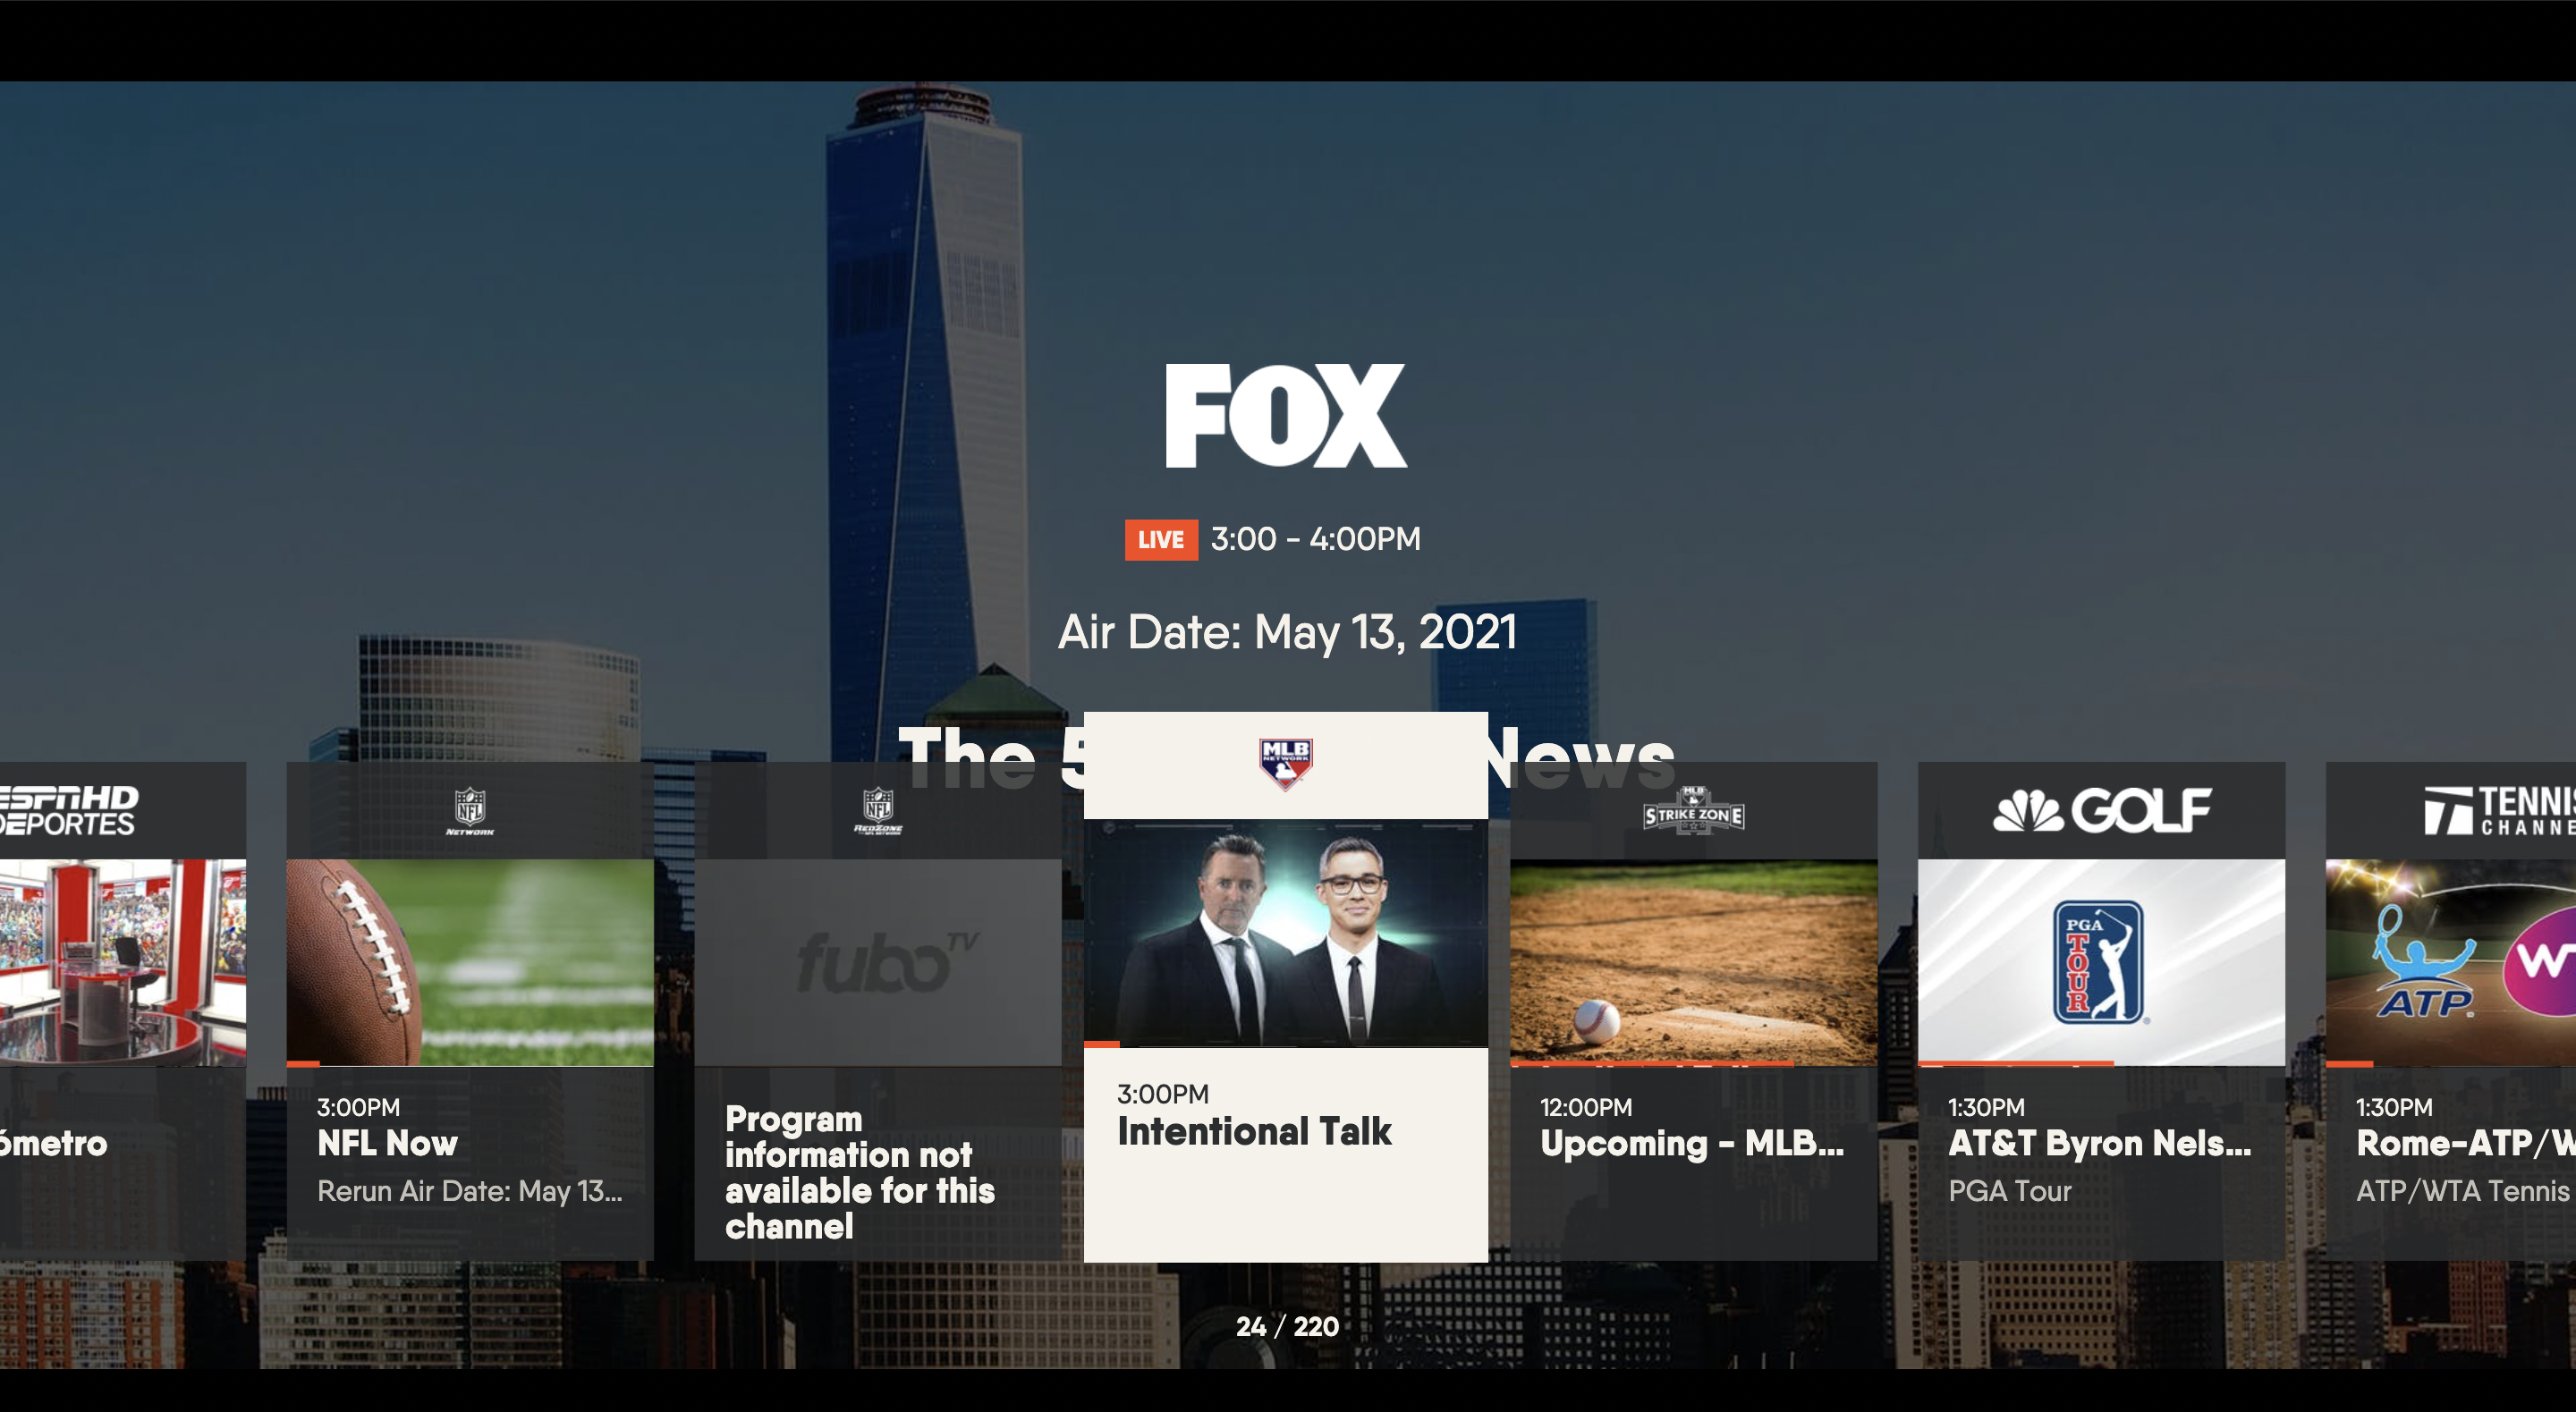 Use the left or right arrows on the remote to find a new channel from the browse while watching menu for the FuboTV app on Vizio, select OK/Enter to view the new channel